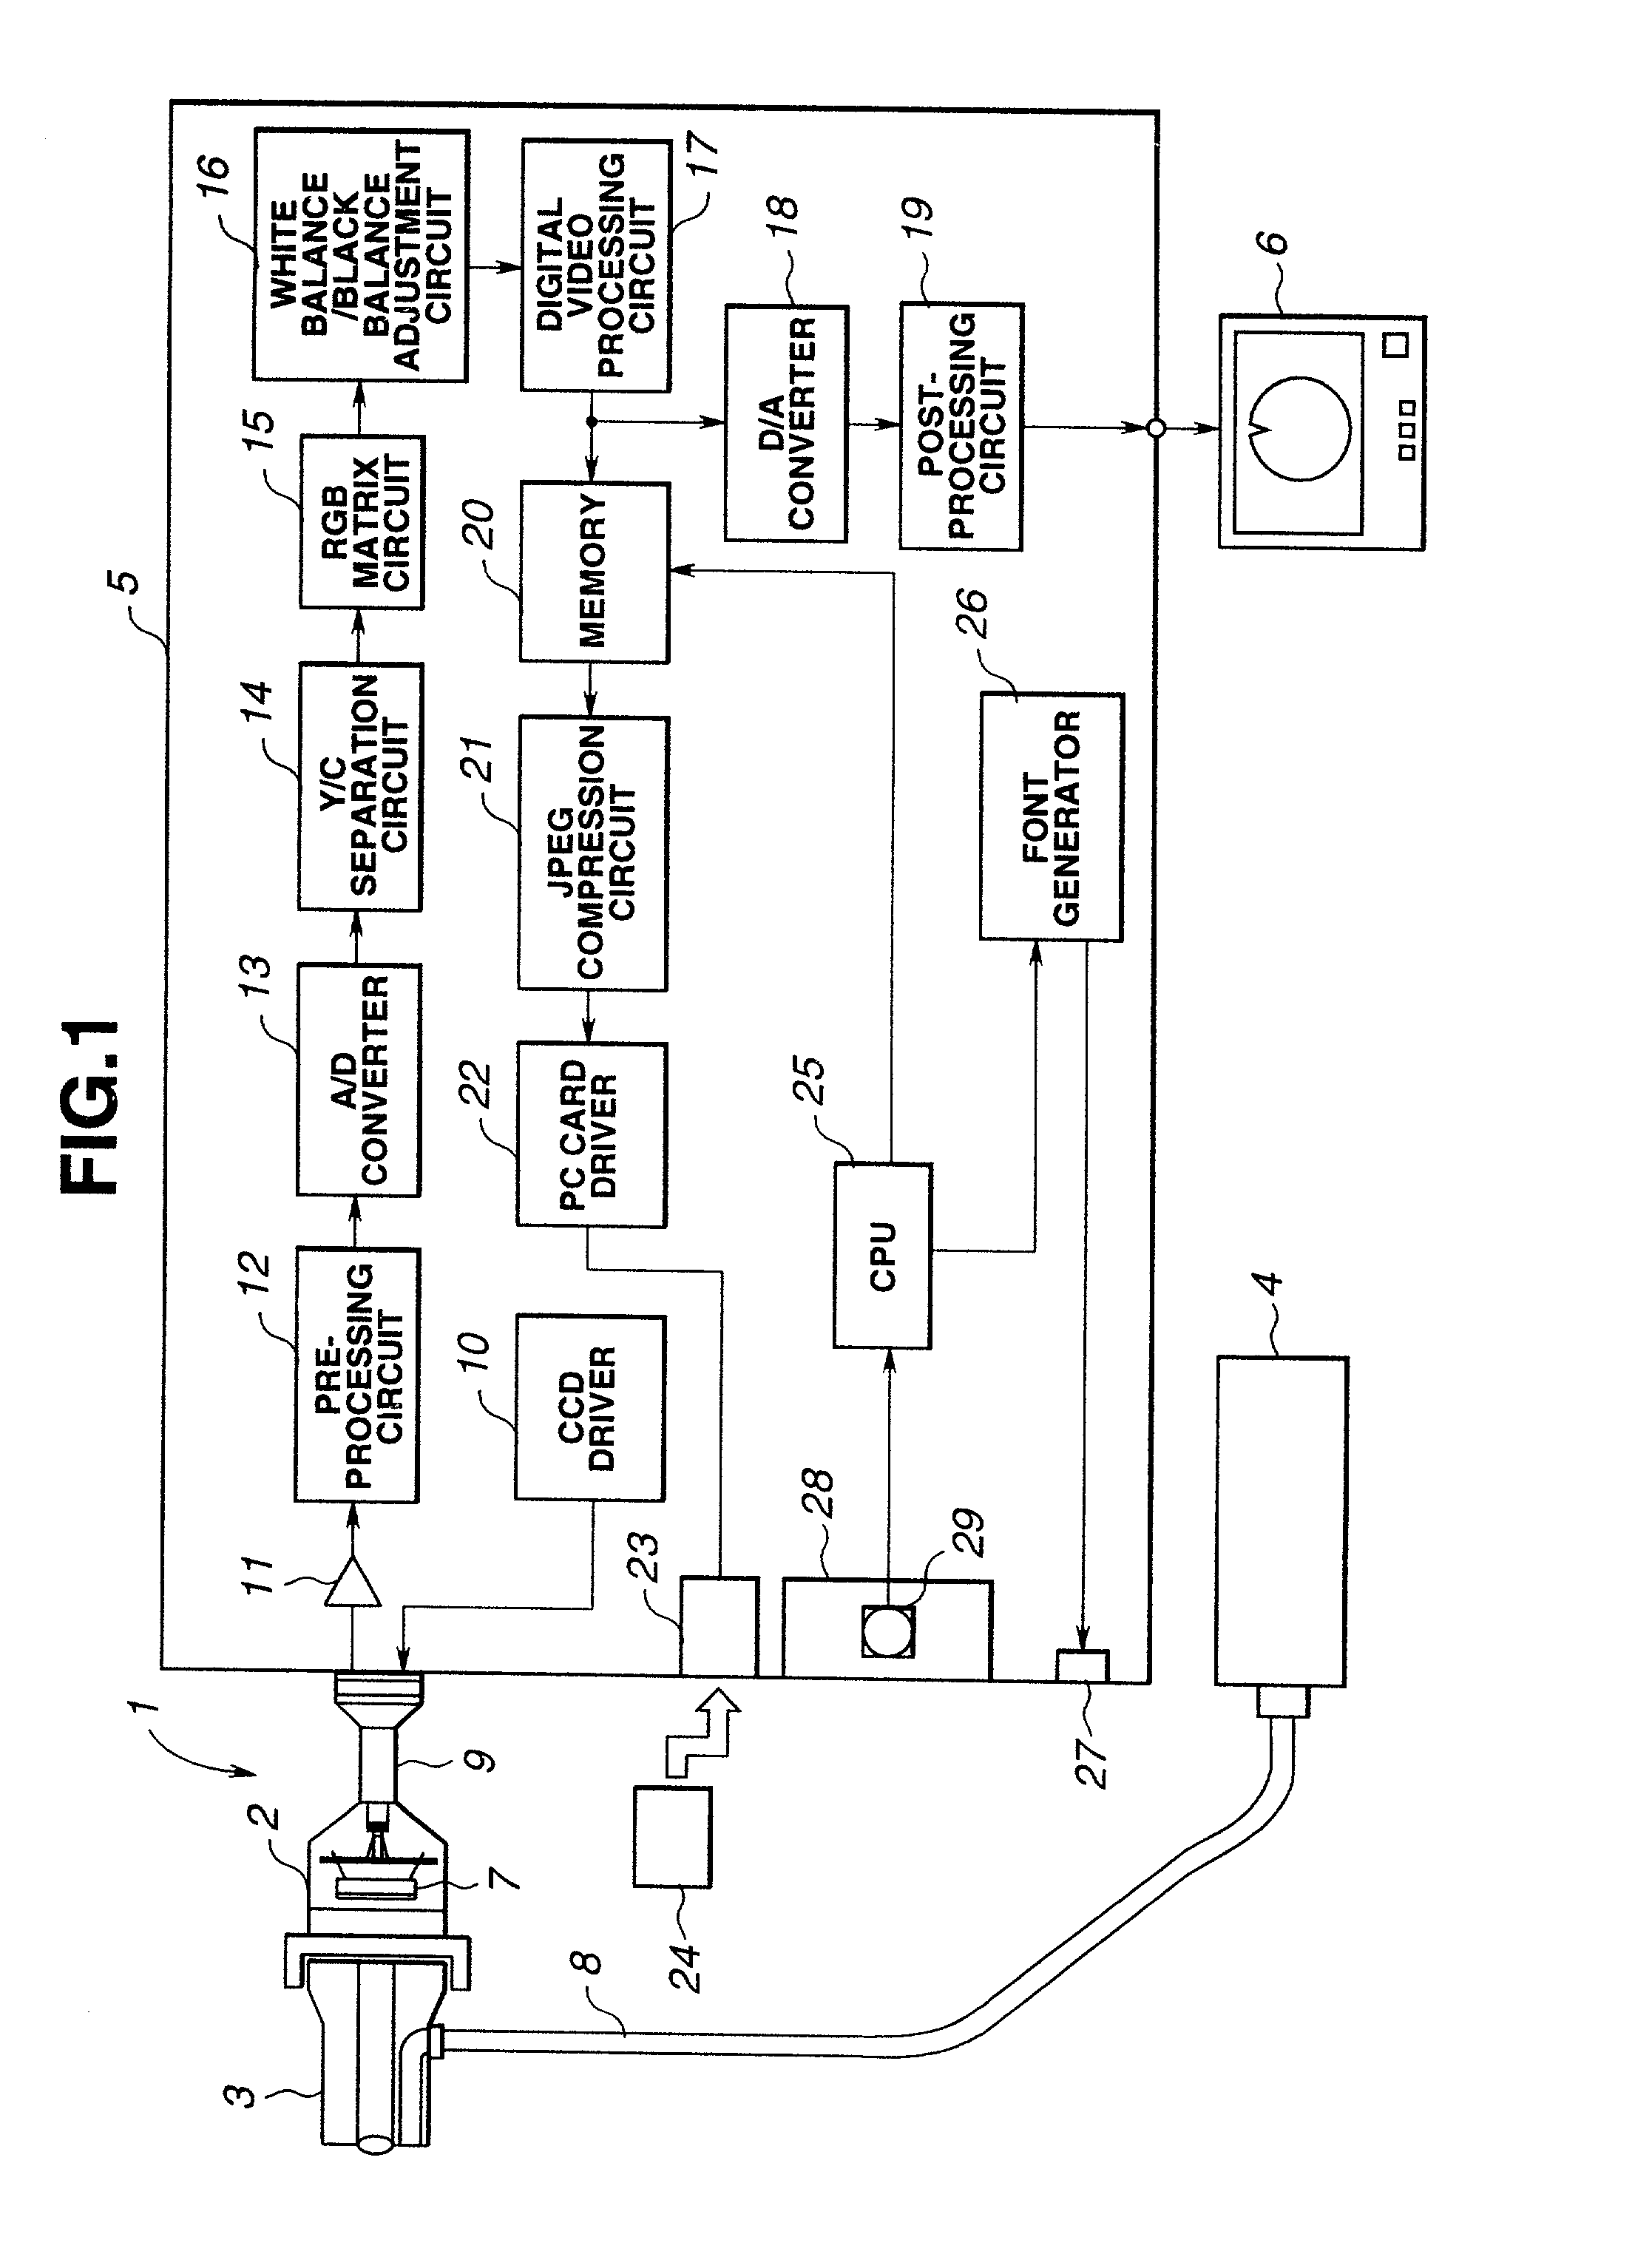 Endoscopic imaging system making it possible to detachably attach expansion unit having external expansion facility and add expansion facility for improving capability of system